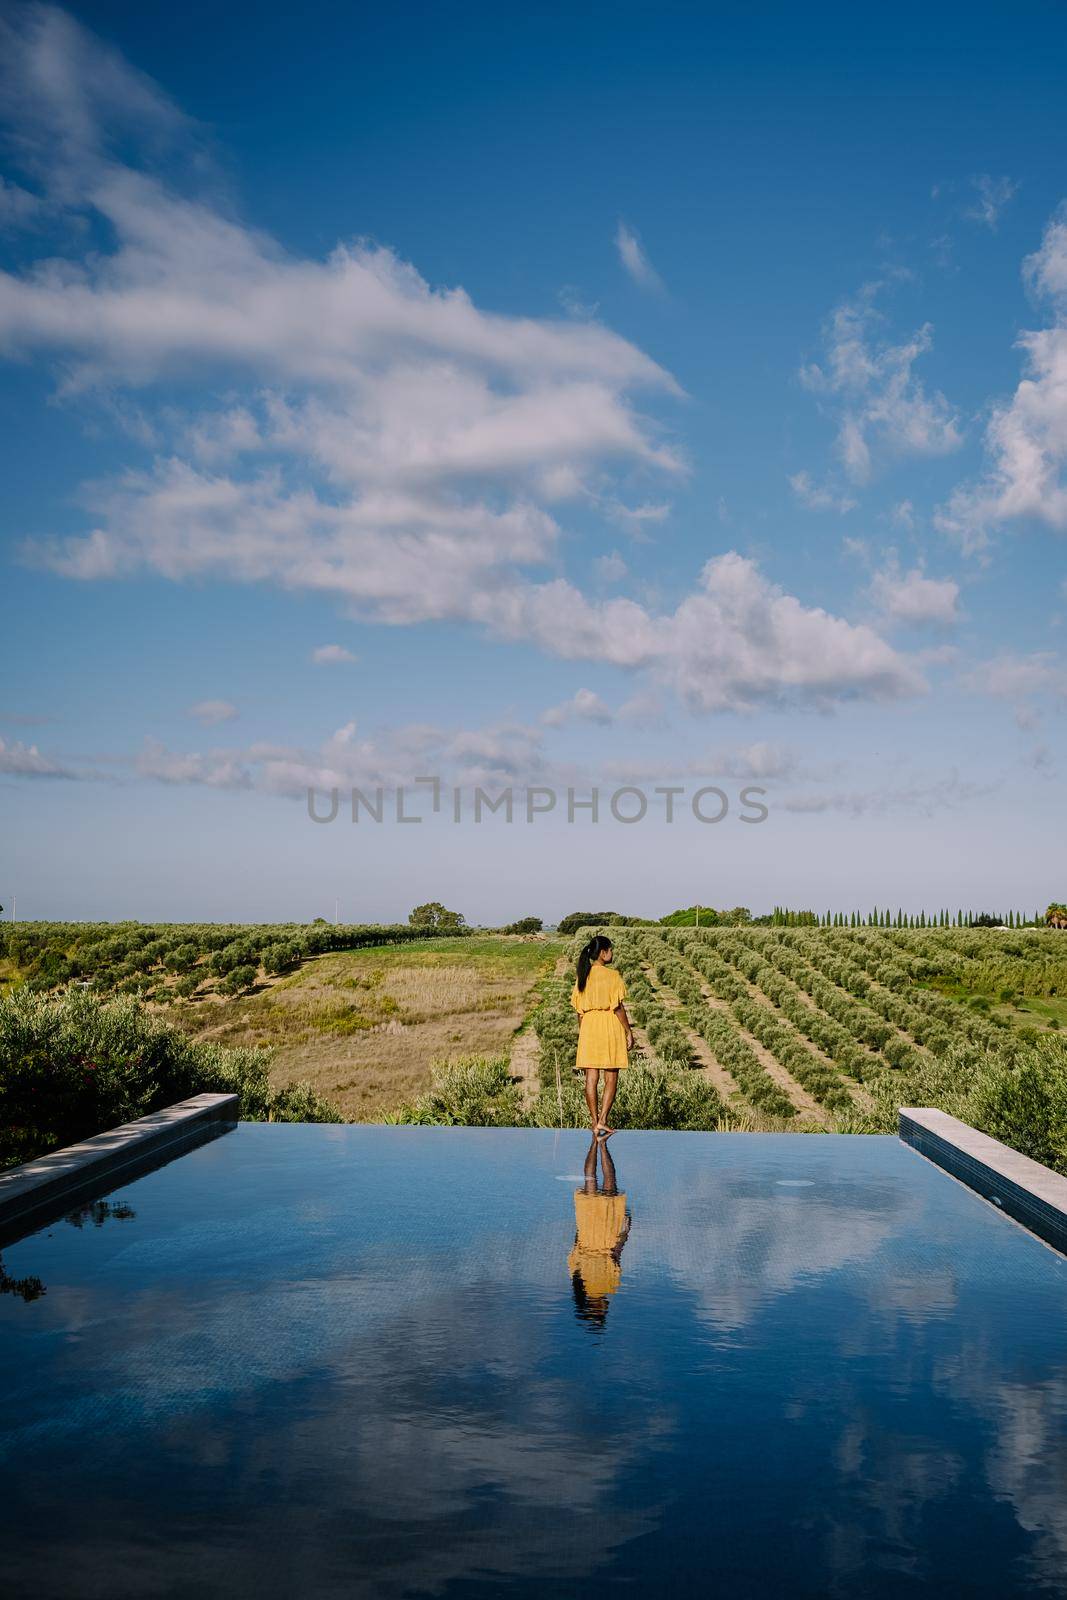 Luxury resort with a view over the wine field in Selinunte Sicily Italy. infinity pool with a view over wine fields in Sicilia, woman on vacation luxury resort